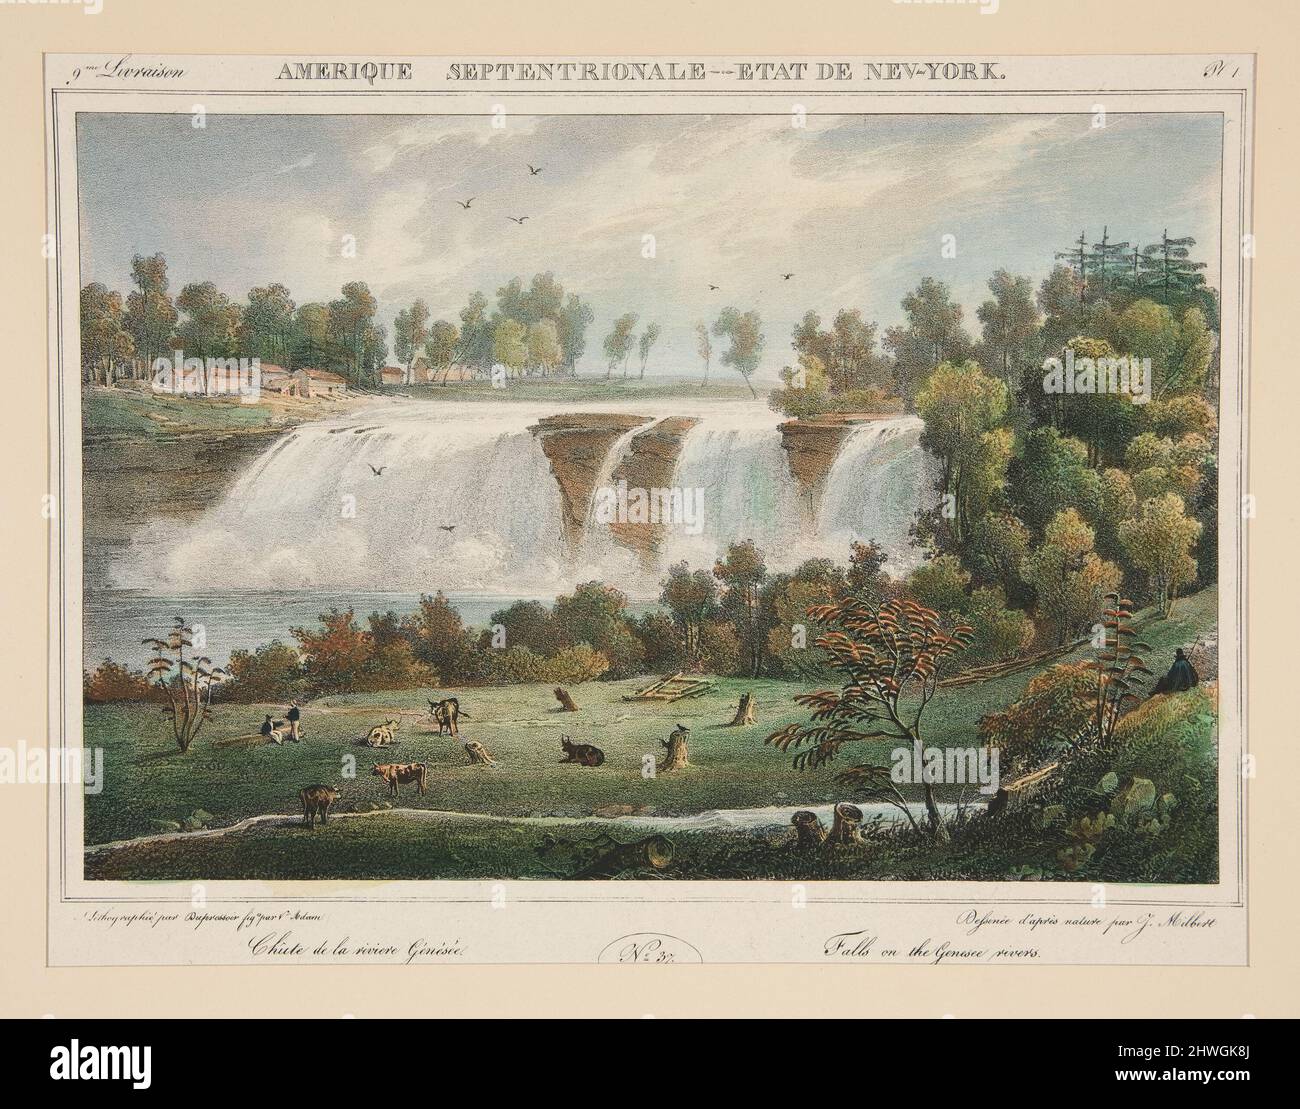 Falls on the Genesee Rivers. no. 37 in the series. Lithographer: John Henry Bufford, American, 1810–1870After: Jacques Gerard Milbert, French, 1766–1840Publisher: J. H. Bufford and Son’s, Lith., Boston, active mid-19th century Stock Photo